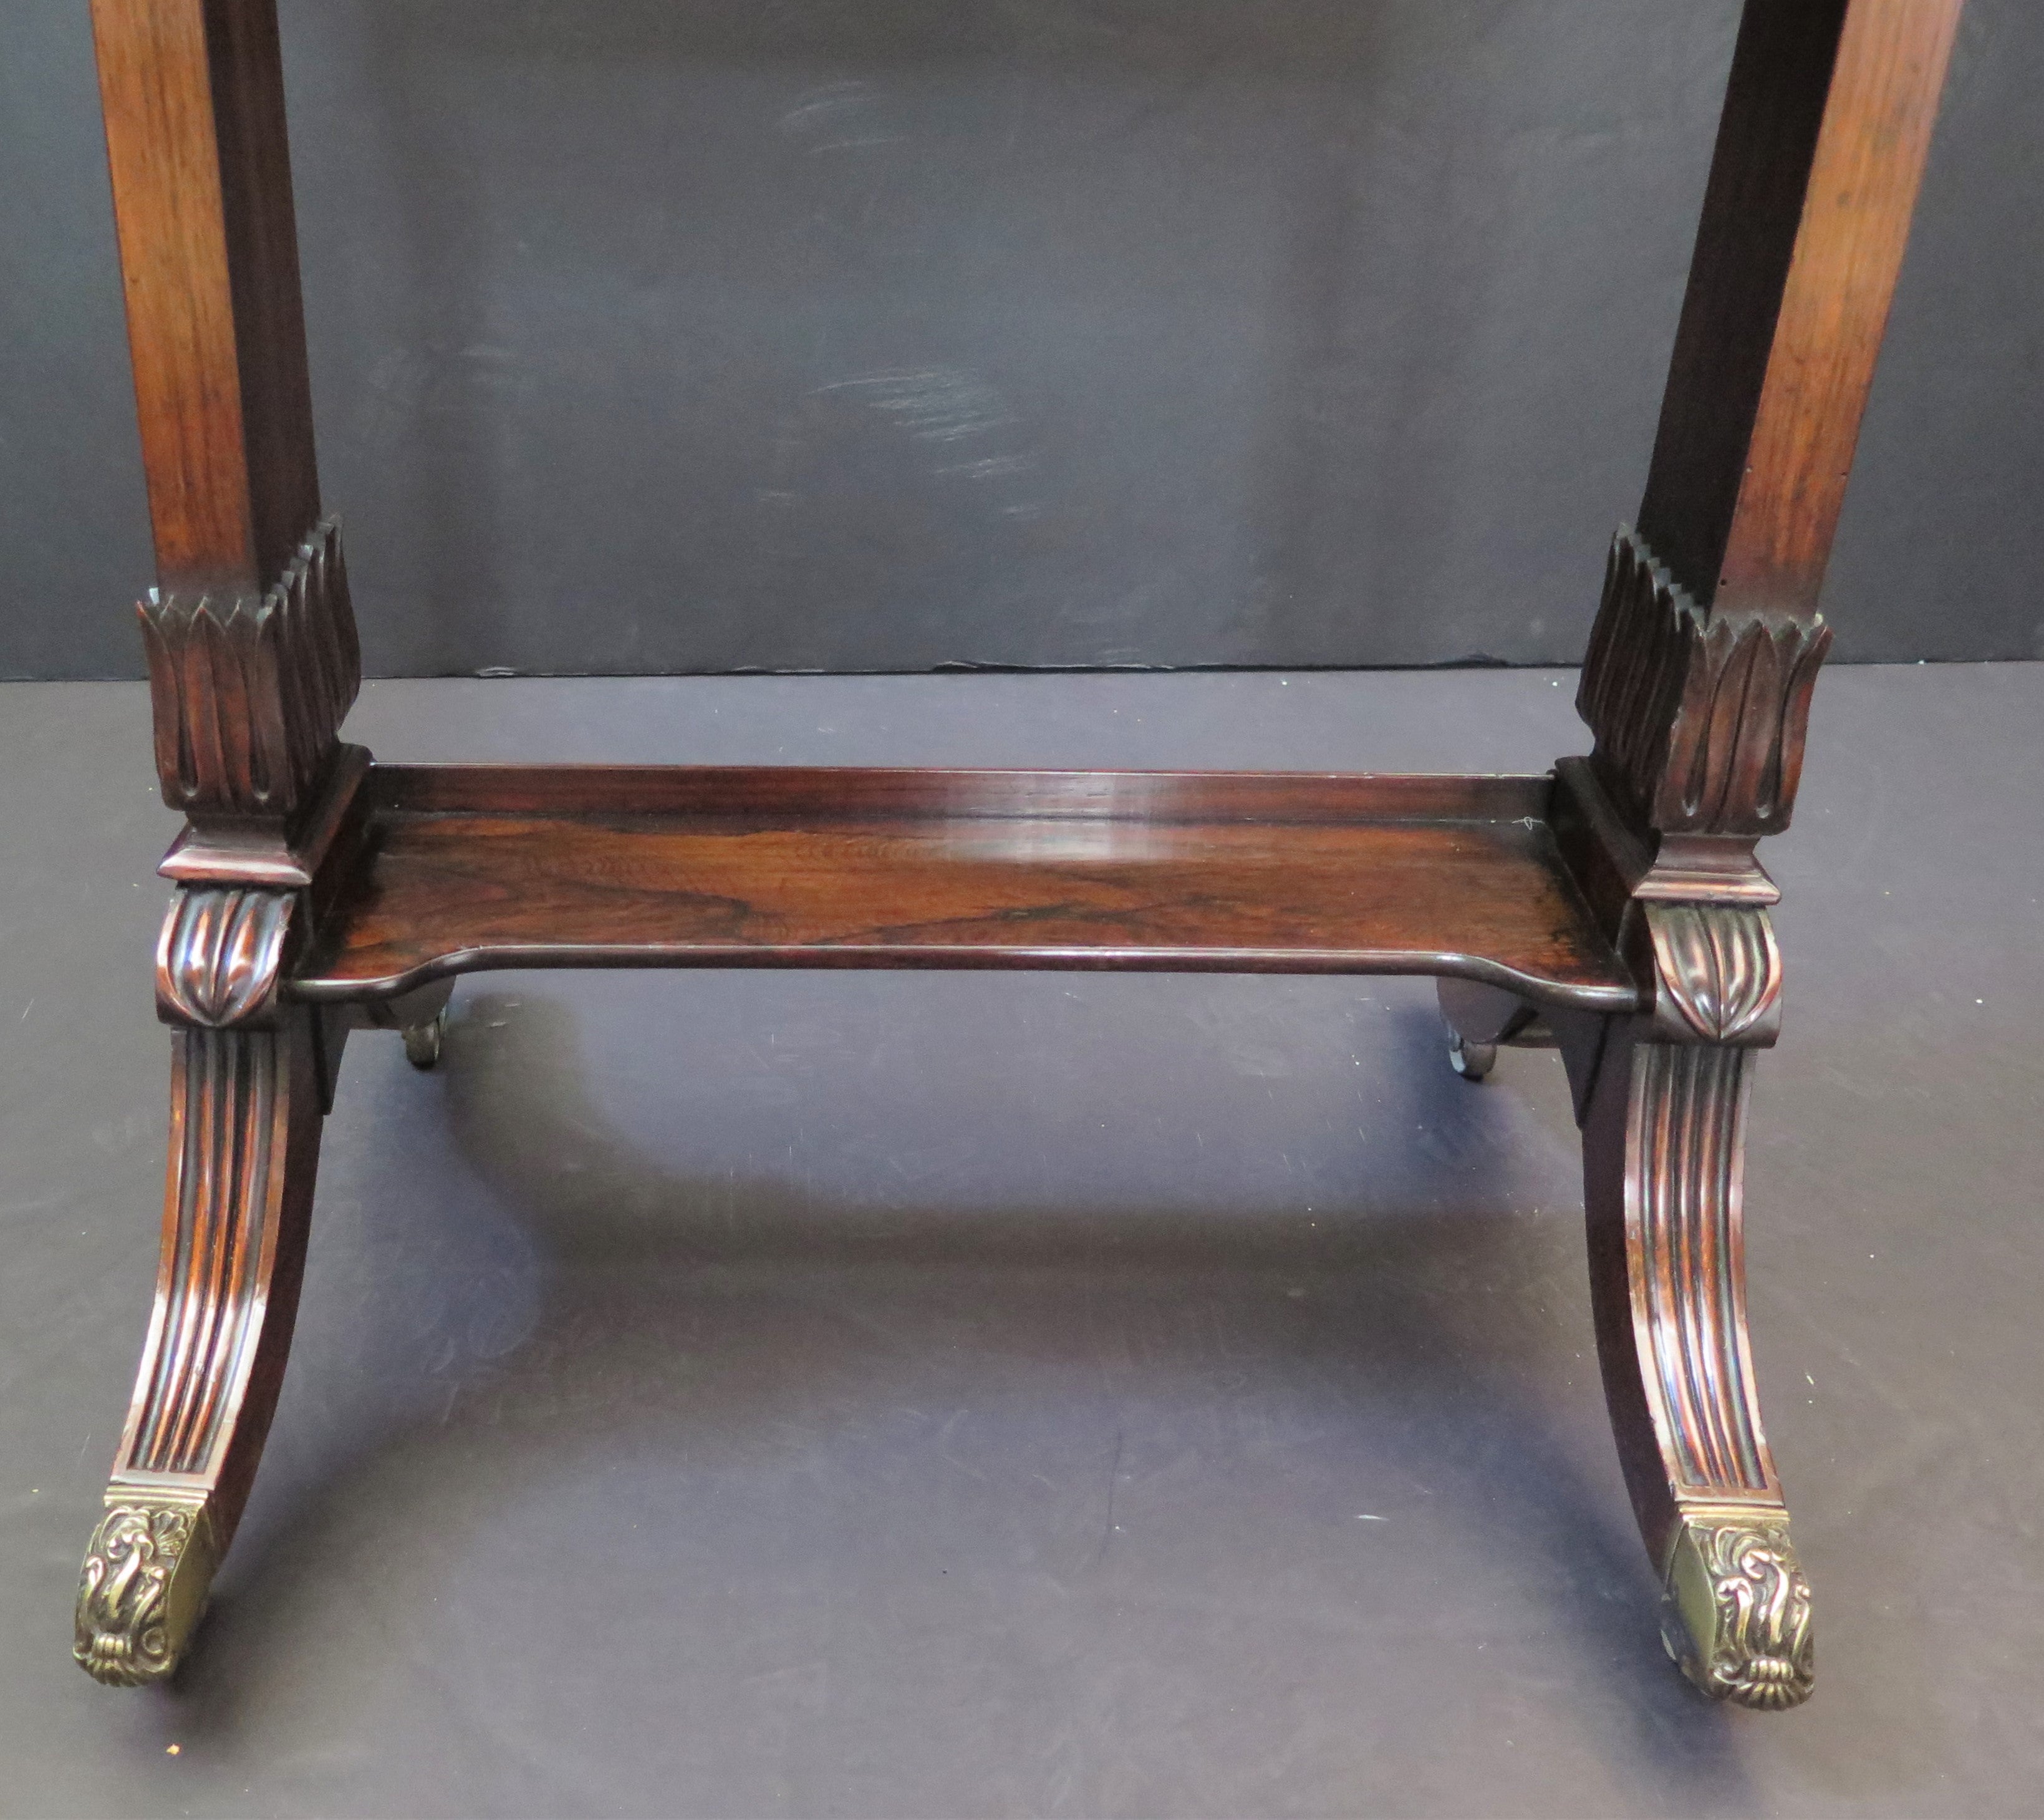 English Regency Lady's Work Table of Rosewood